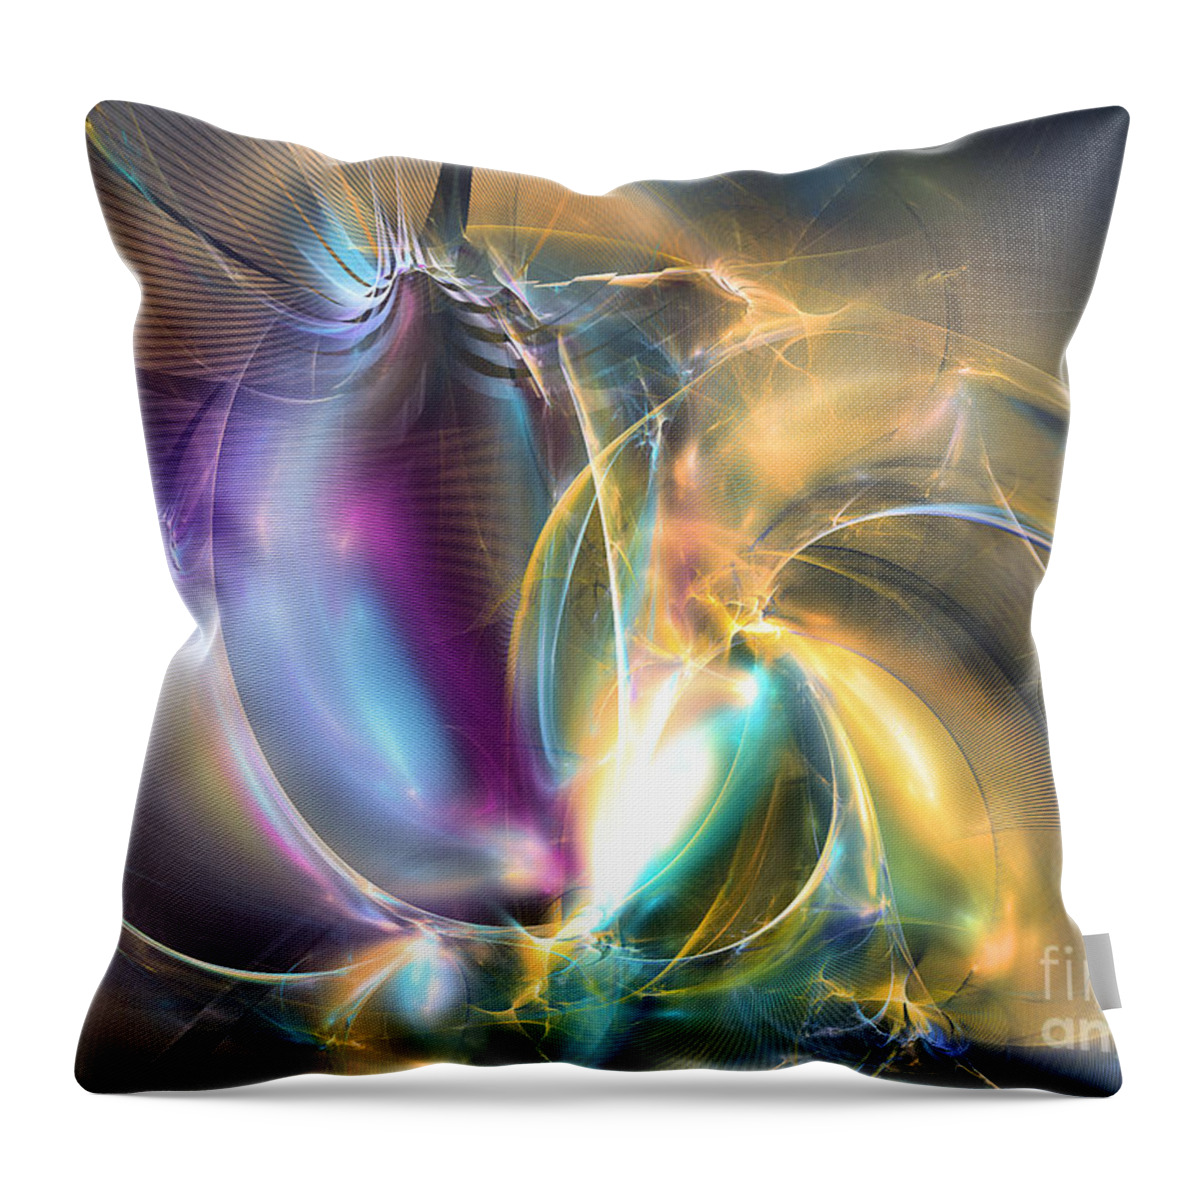 Art Throw Pillow featuring the digital art Passionate - Abstract art by Sipo Liimatainen